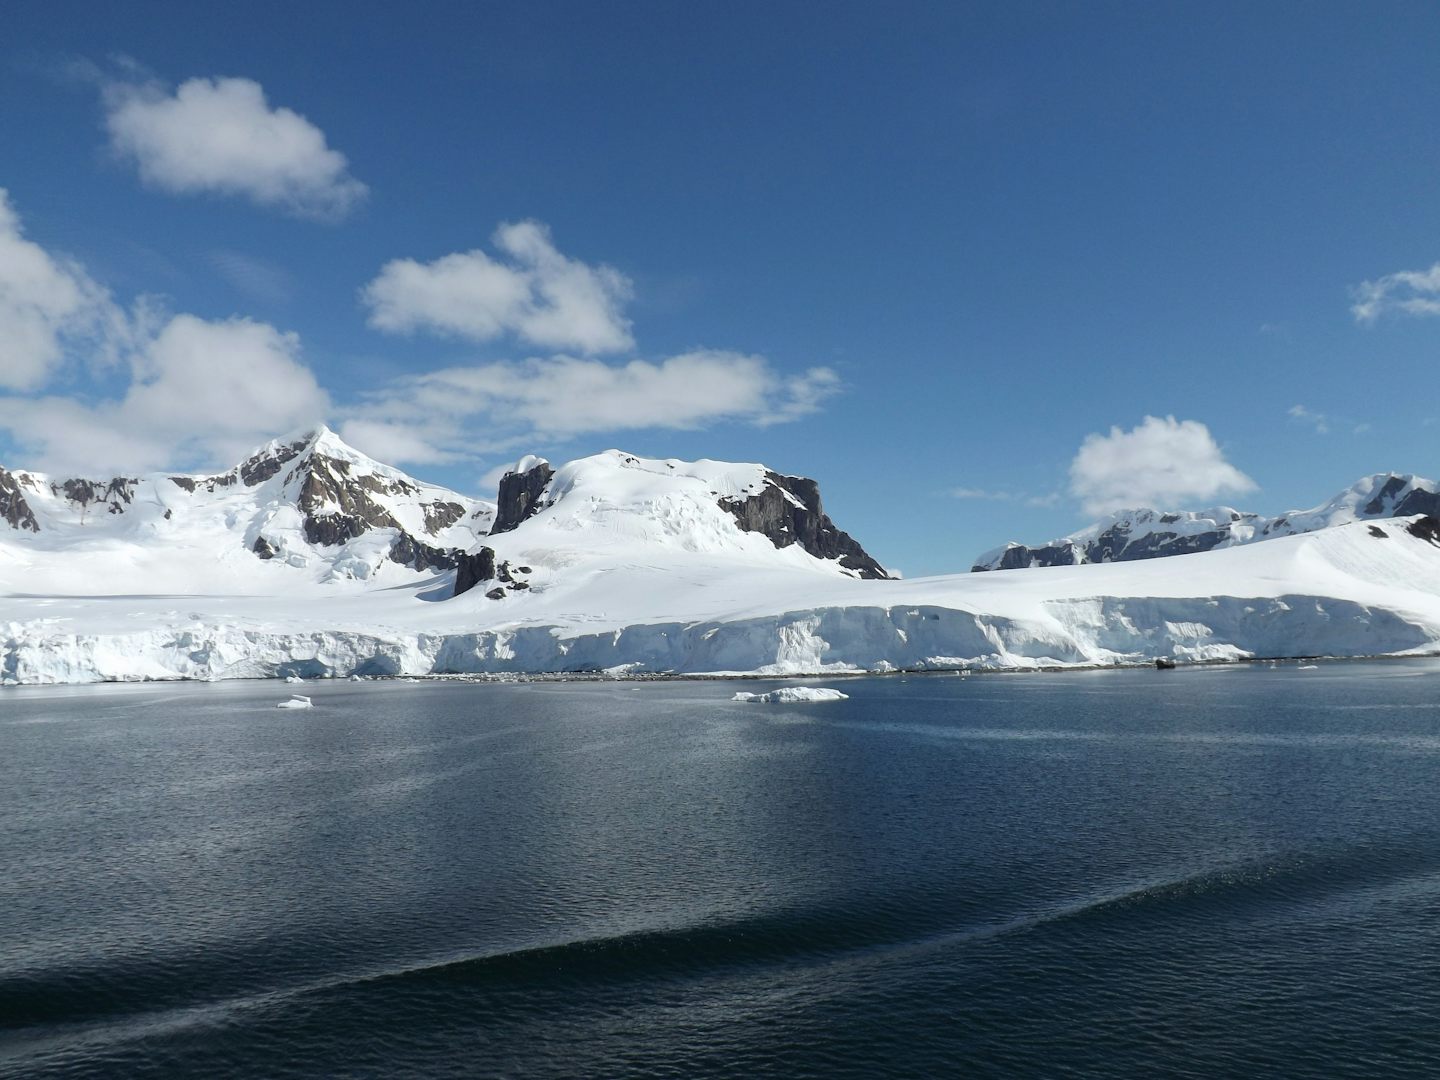 A rare blue sky day in the Antarctica, but just typical of what we enjoyed